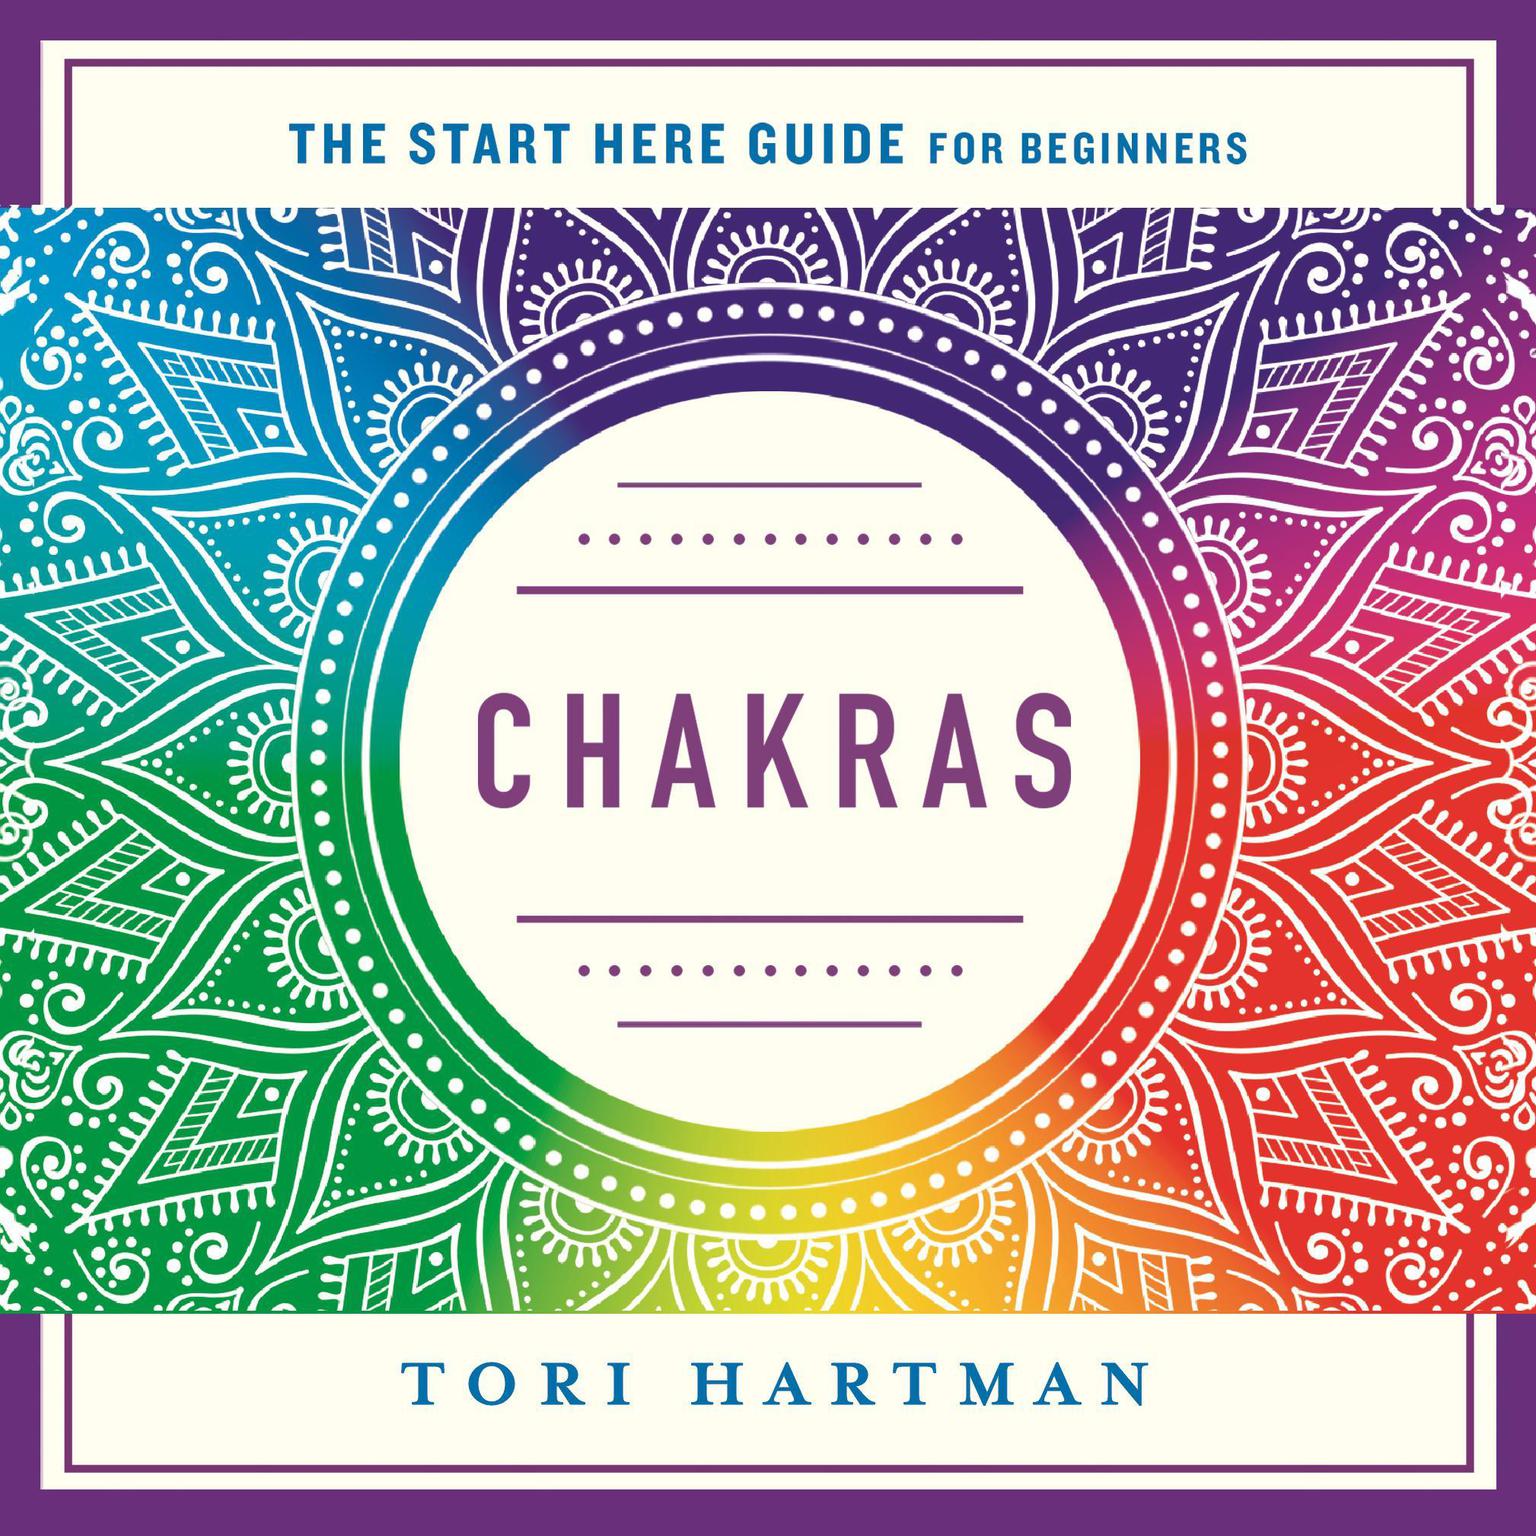 Chakras: Using the Chakras for Emotional, Physical, and Spiritual Well-Being (A Start Here Guide) Audiobook, by Tori Hartman